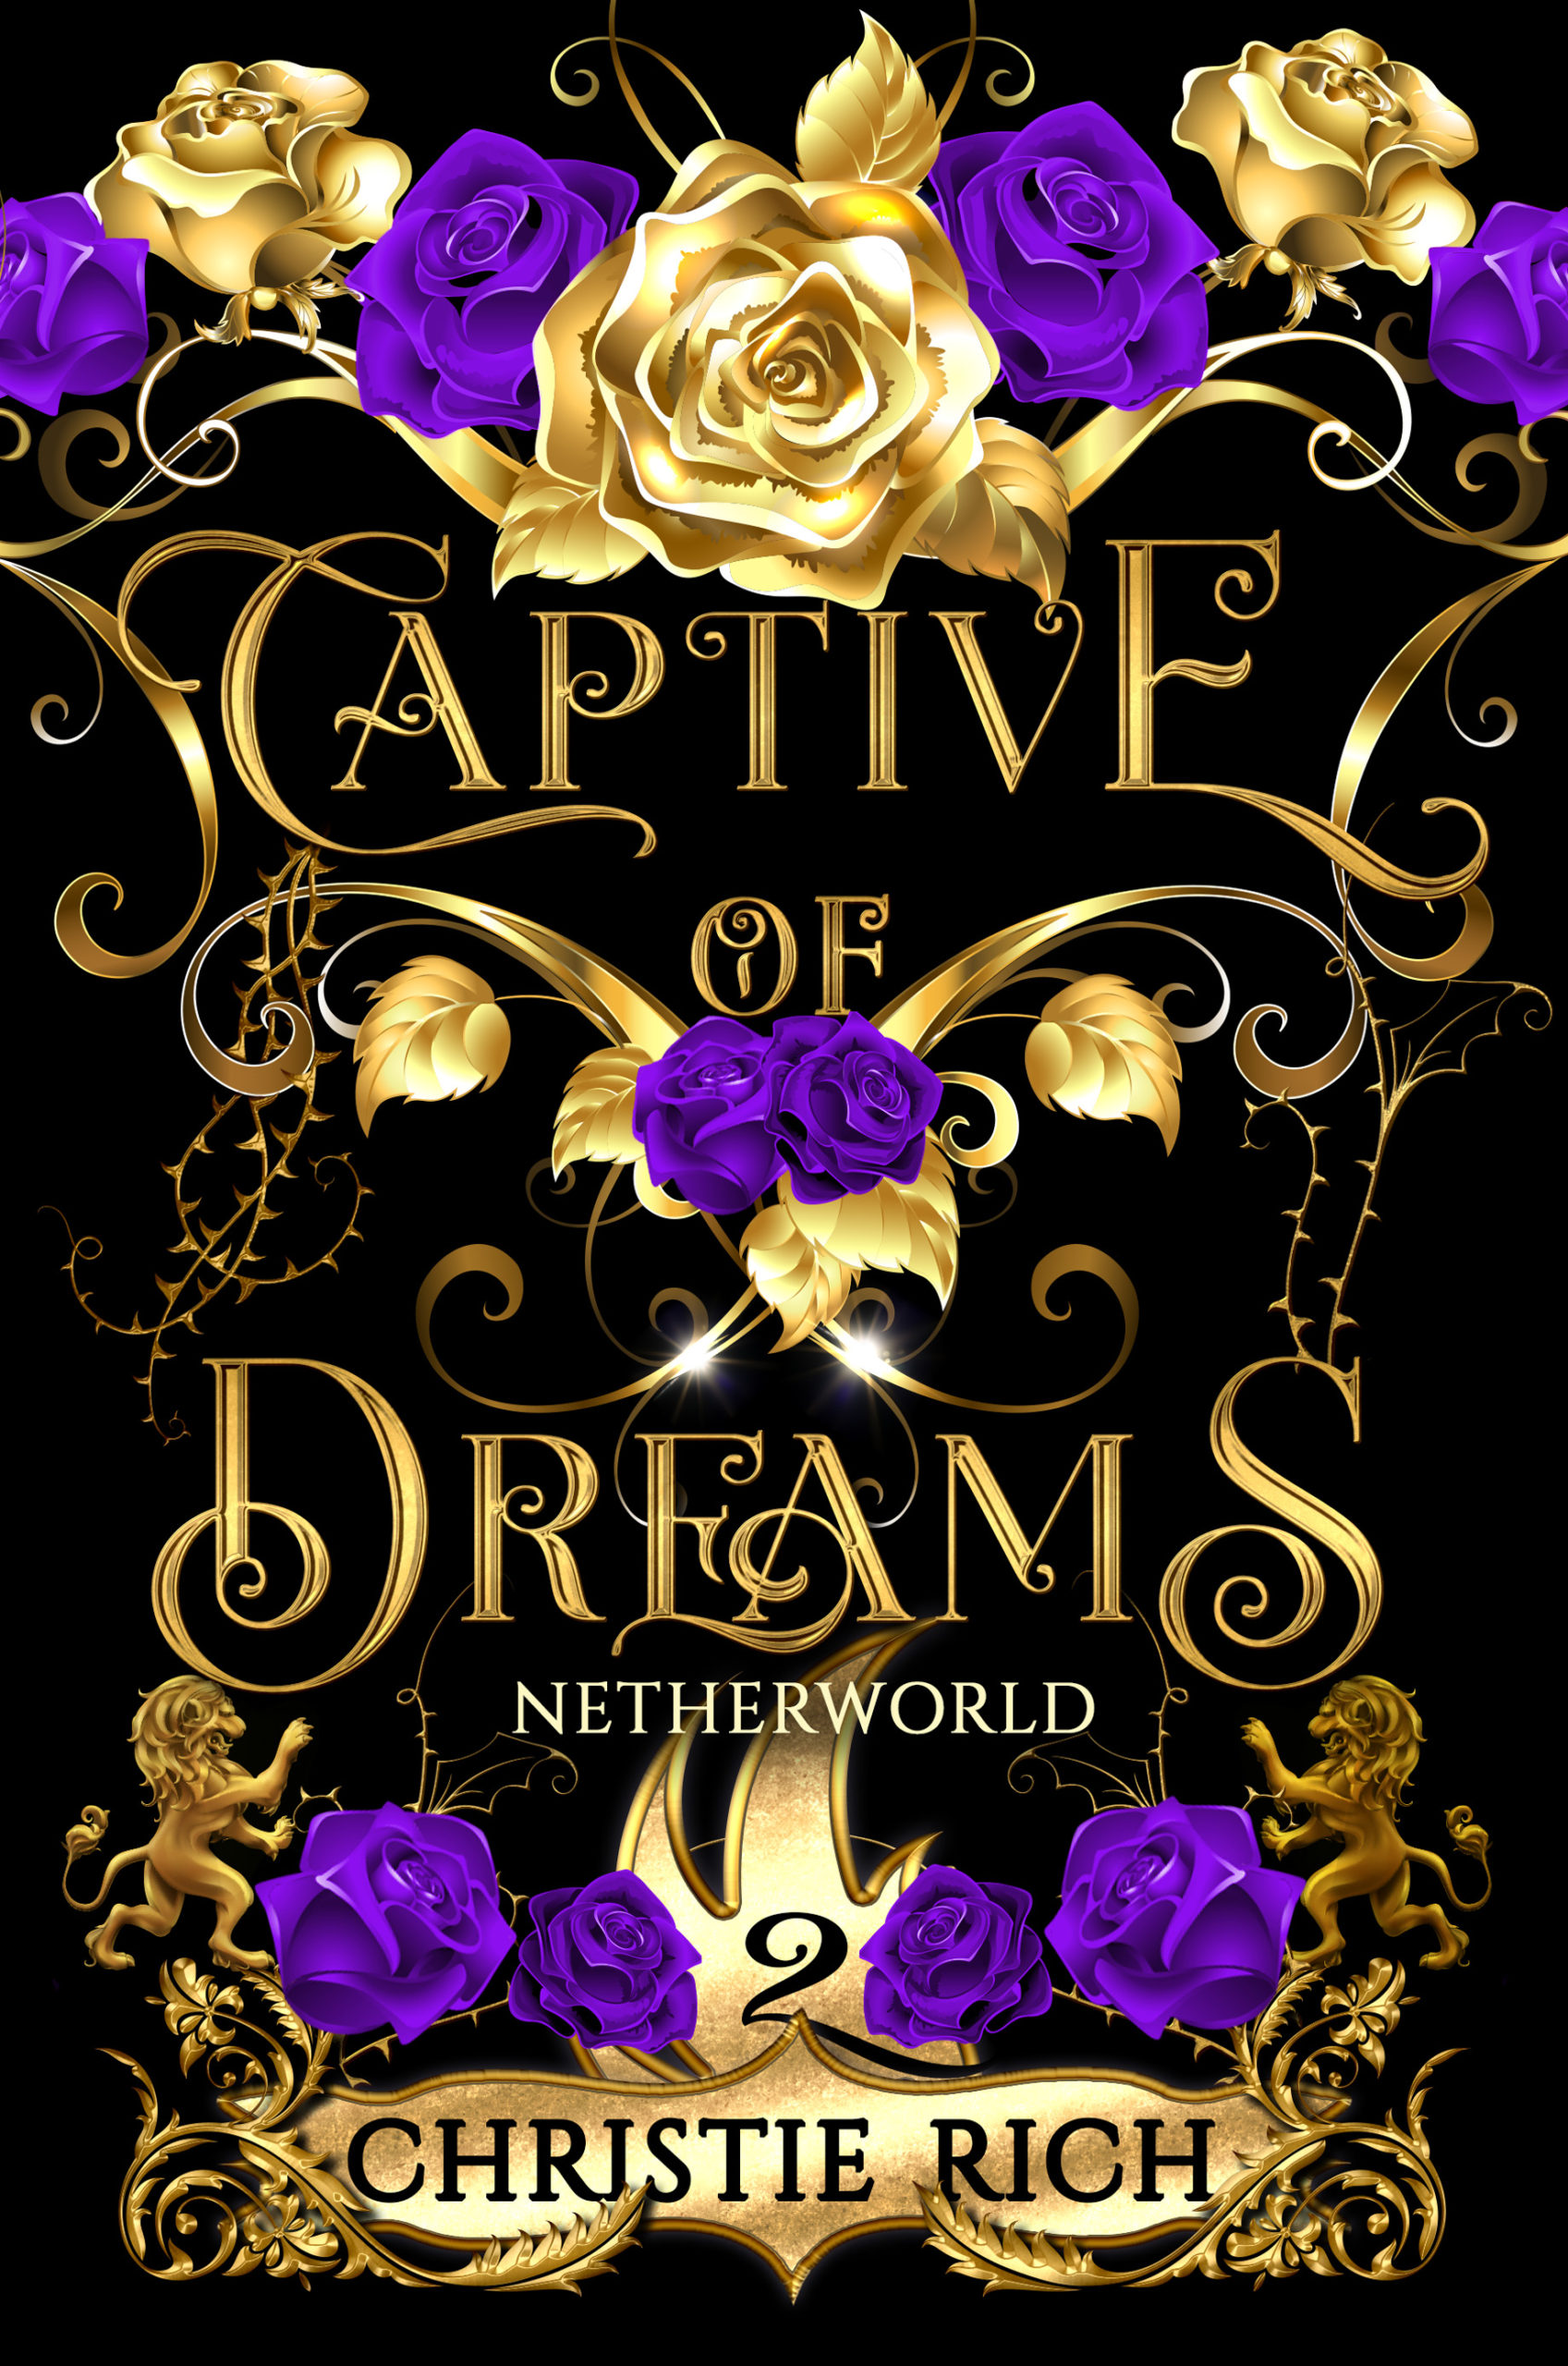 Captive of Dreams in gold letters and purple roses in a captivating design